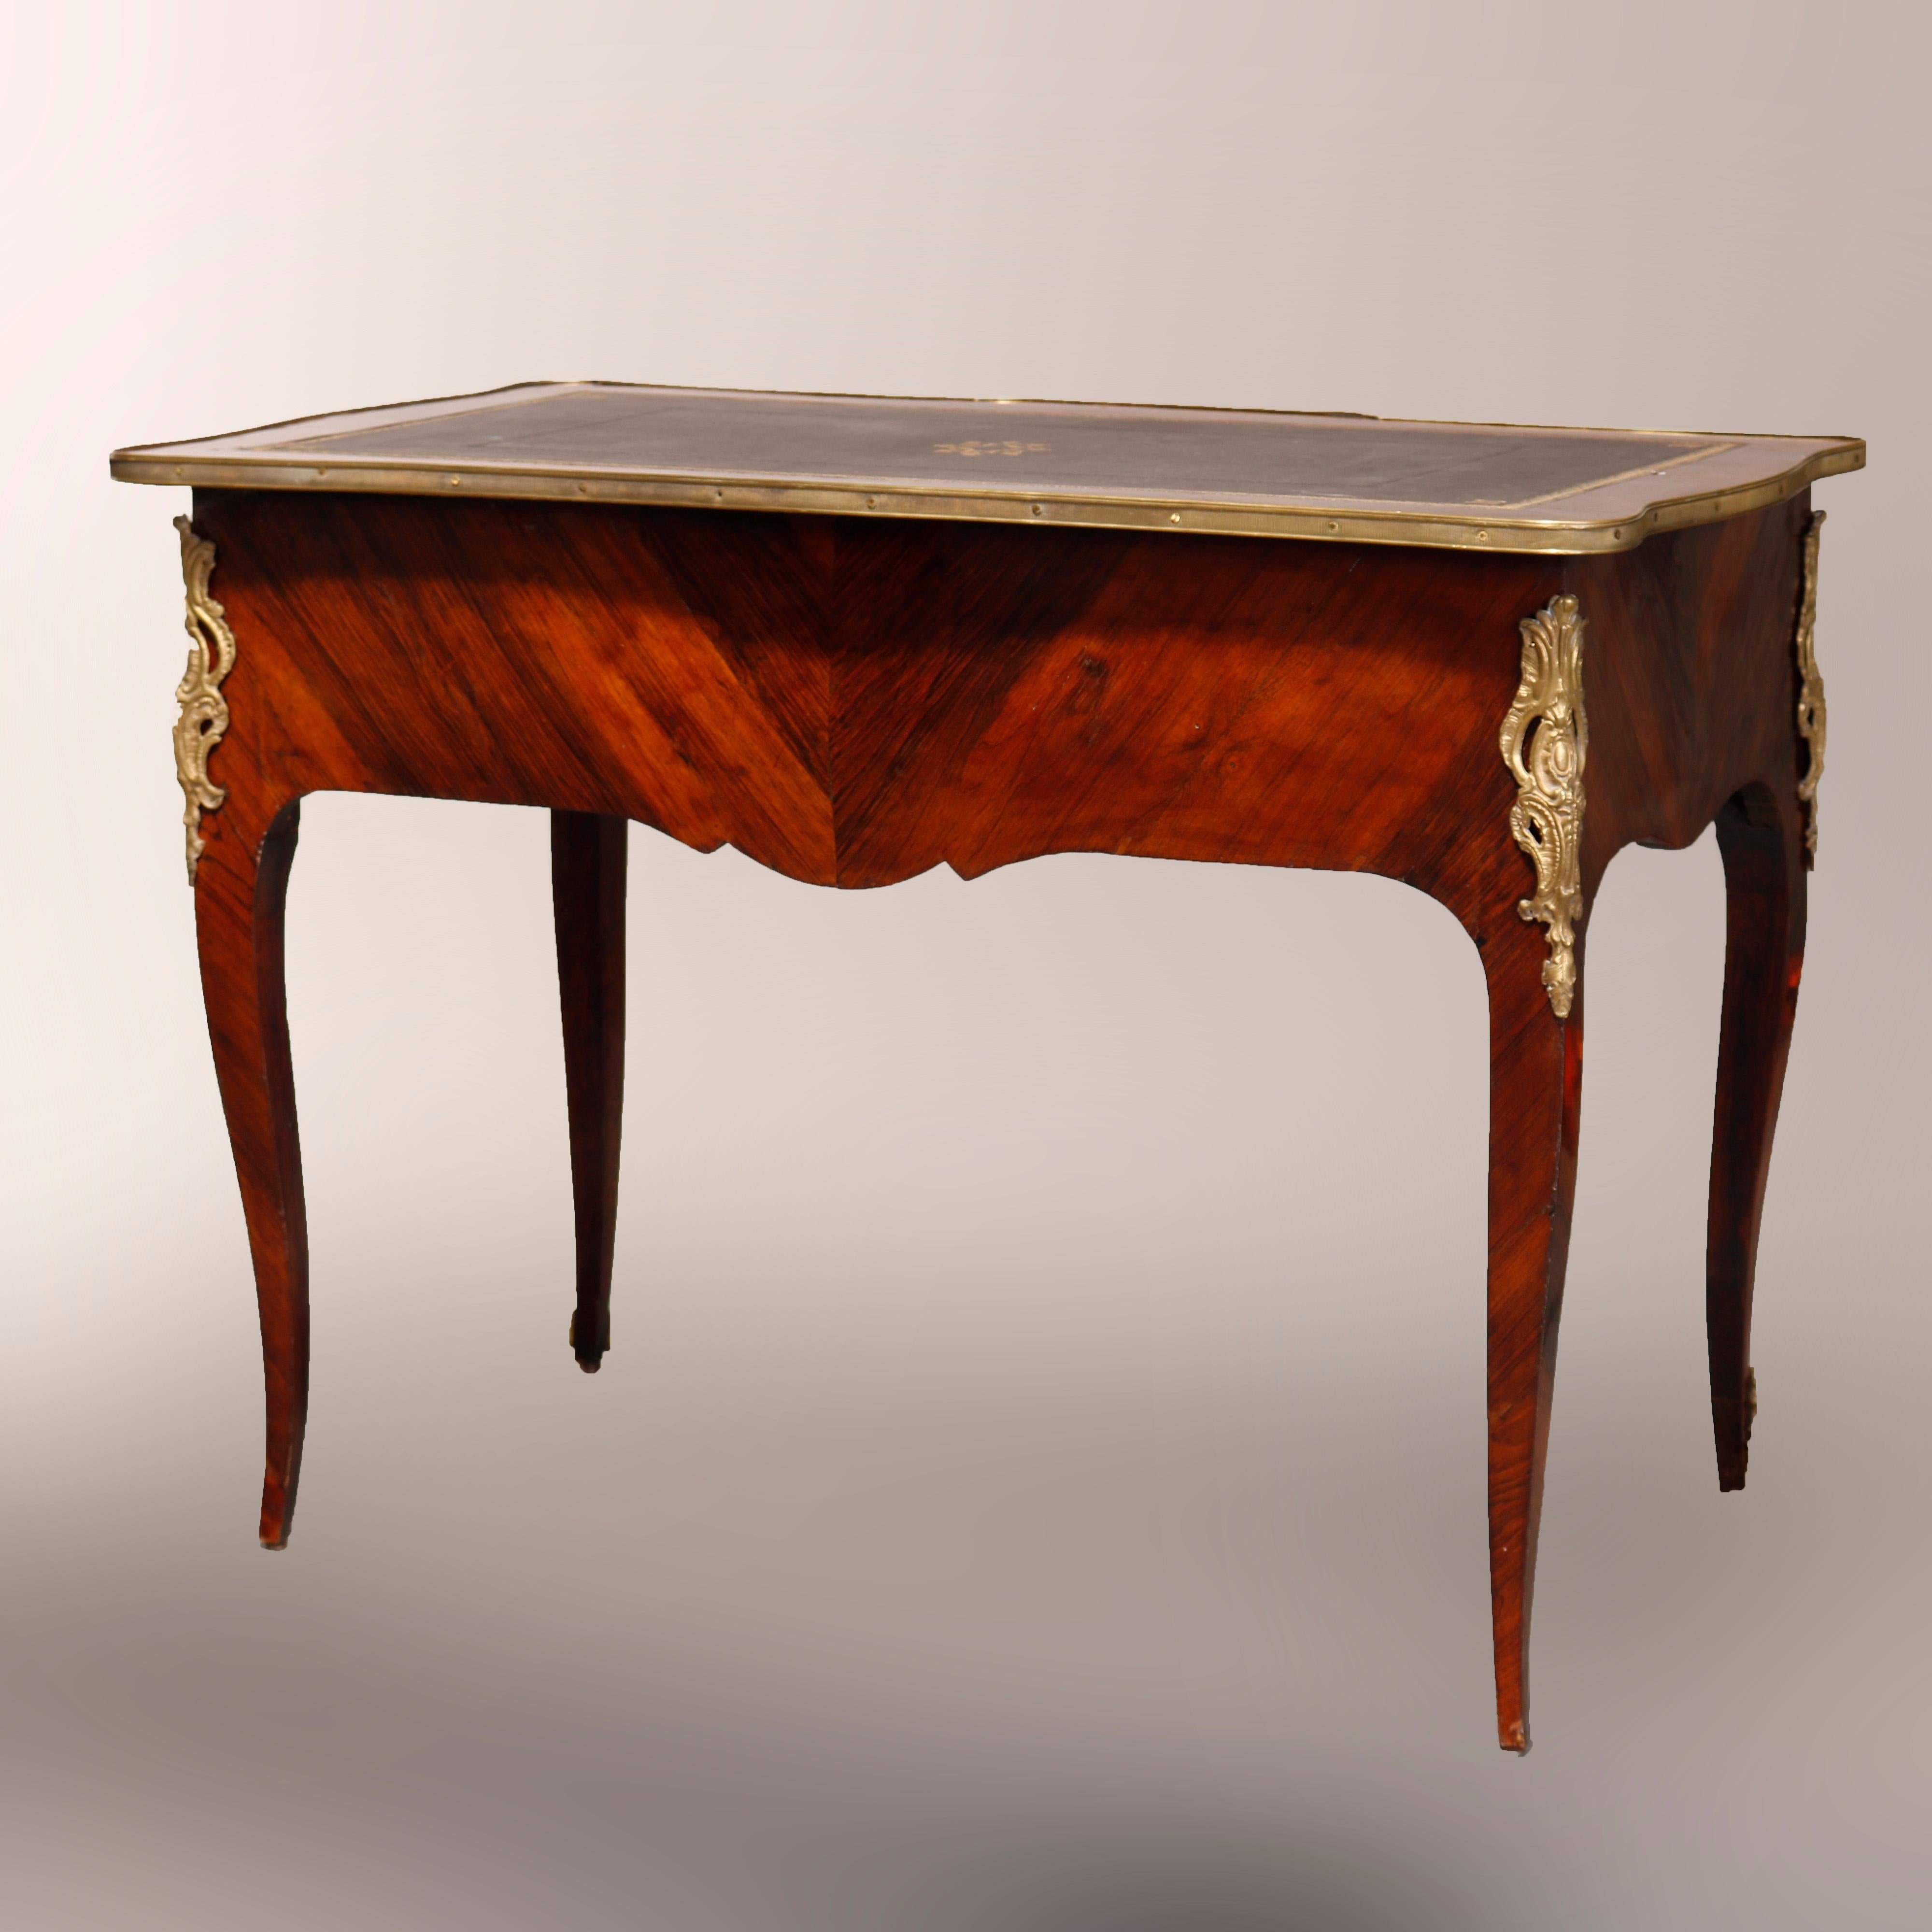 Carved Antique French Louis XV Style Rosewood and Ormolu Bureau Plat, circa 1890